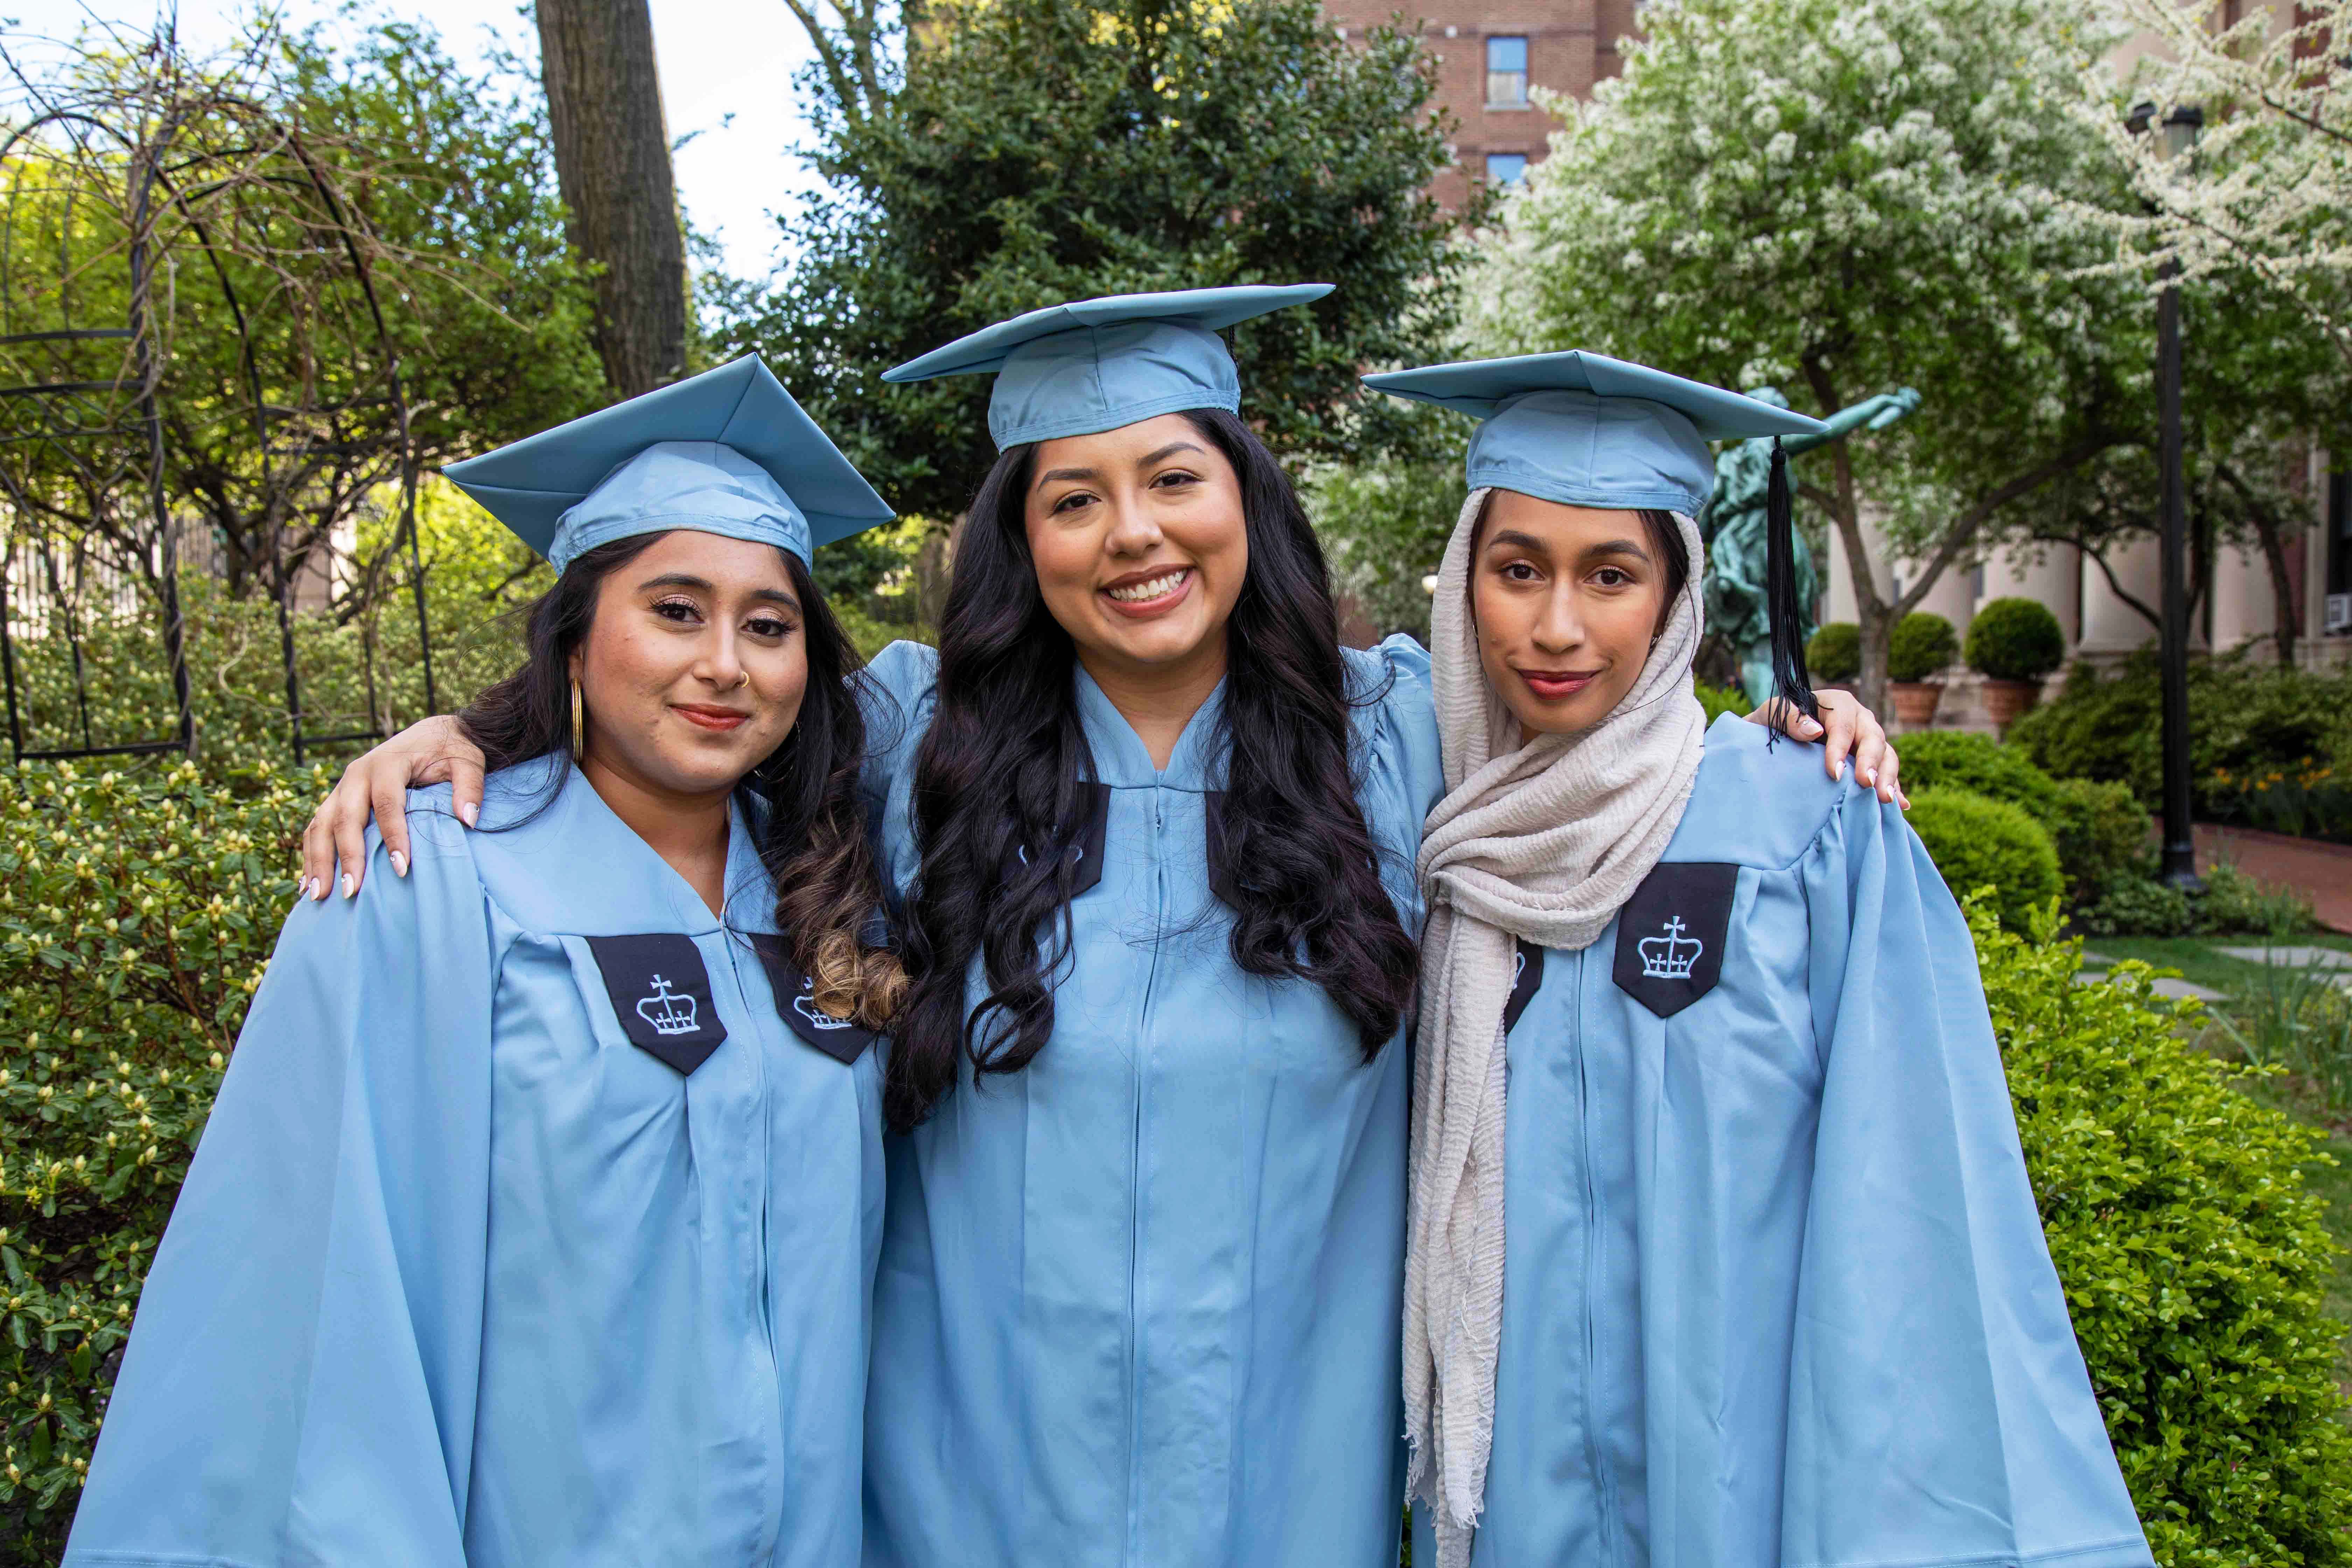 15 Images to Count Down Five Days to Commencement Barnard College